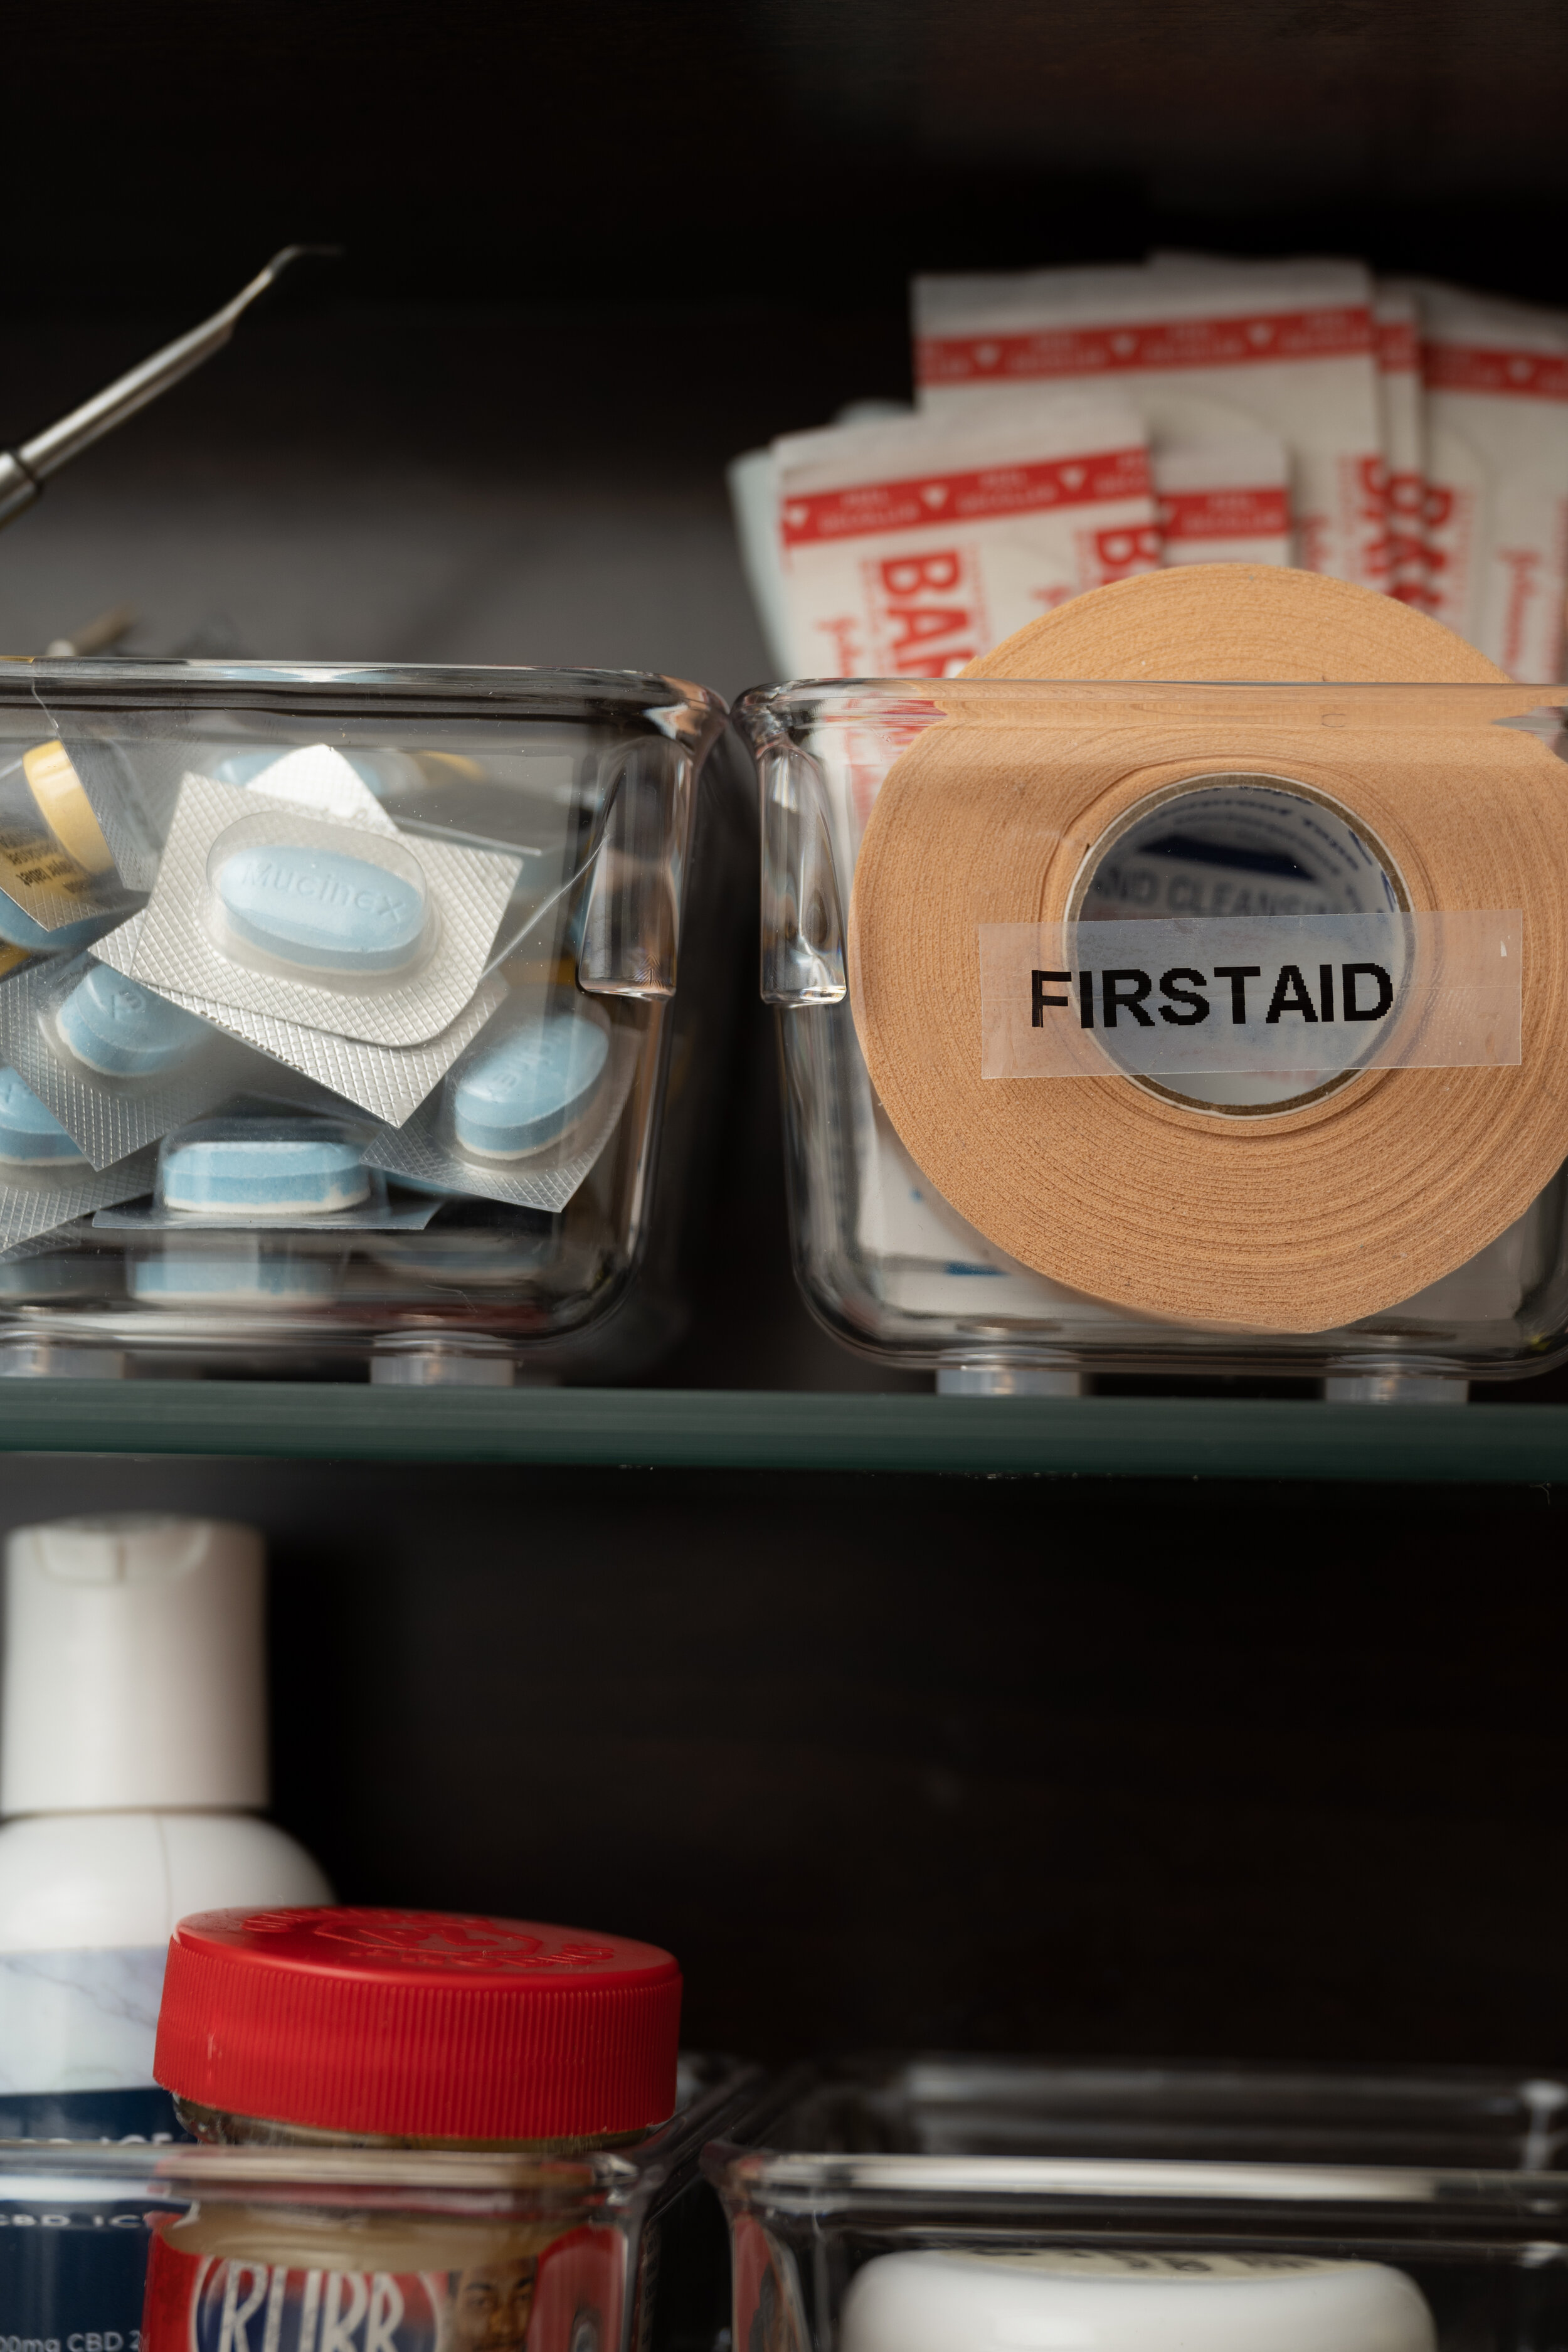 How To Easily Organize Your Medicine Cabinet At Home — Organize For Love